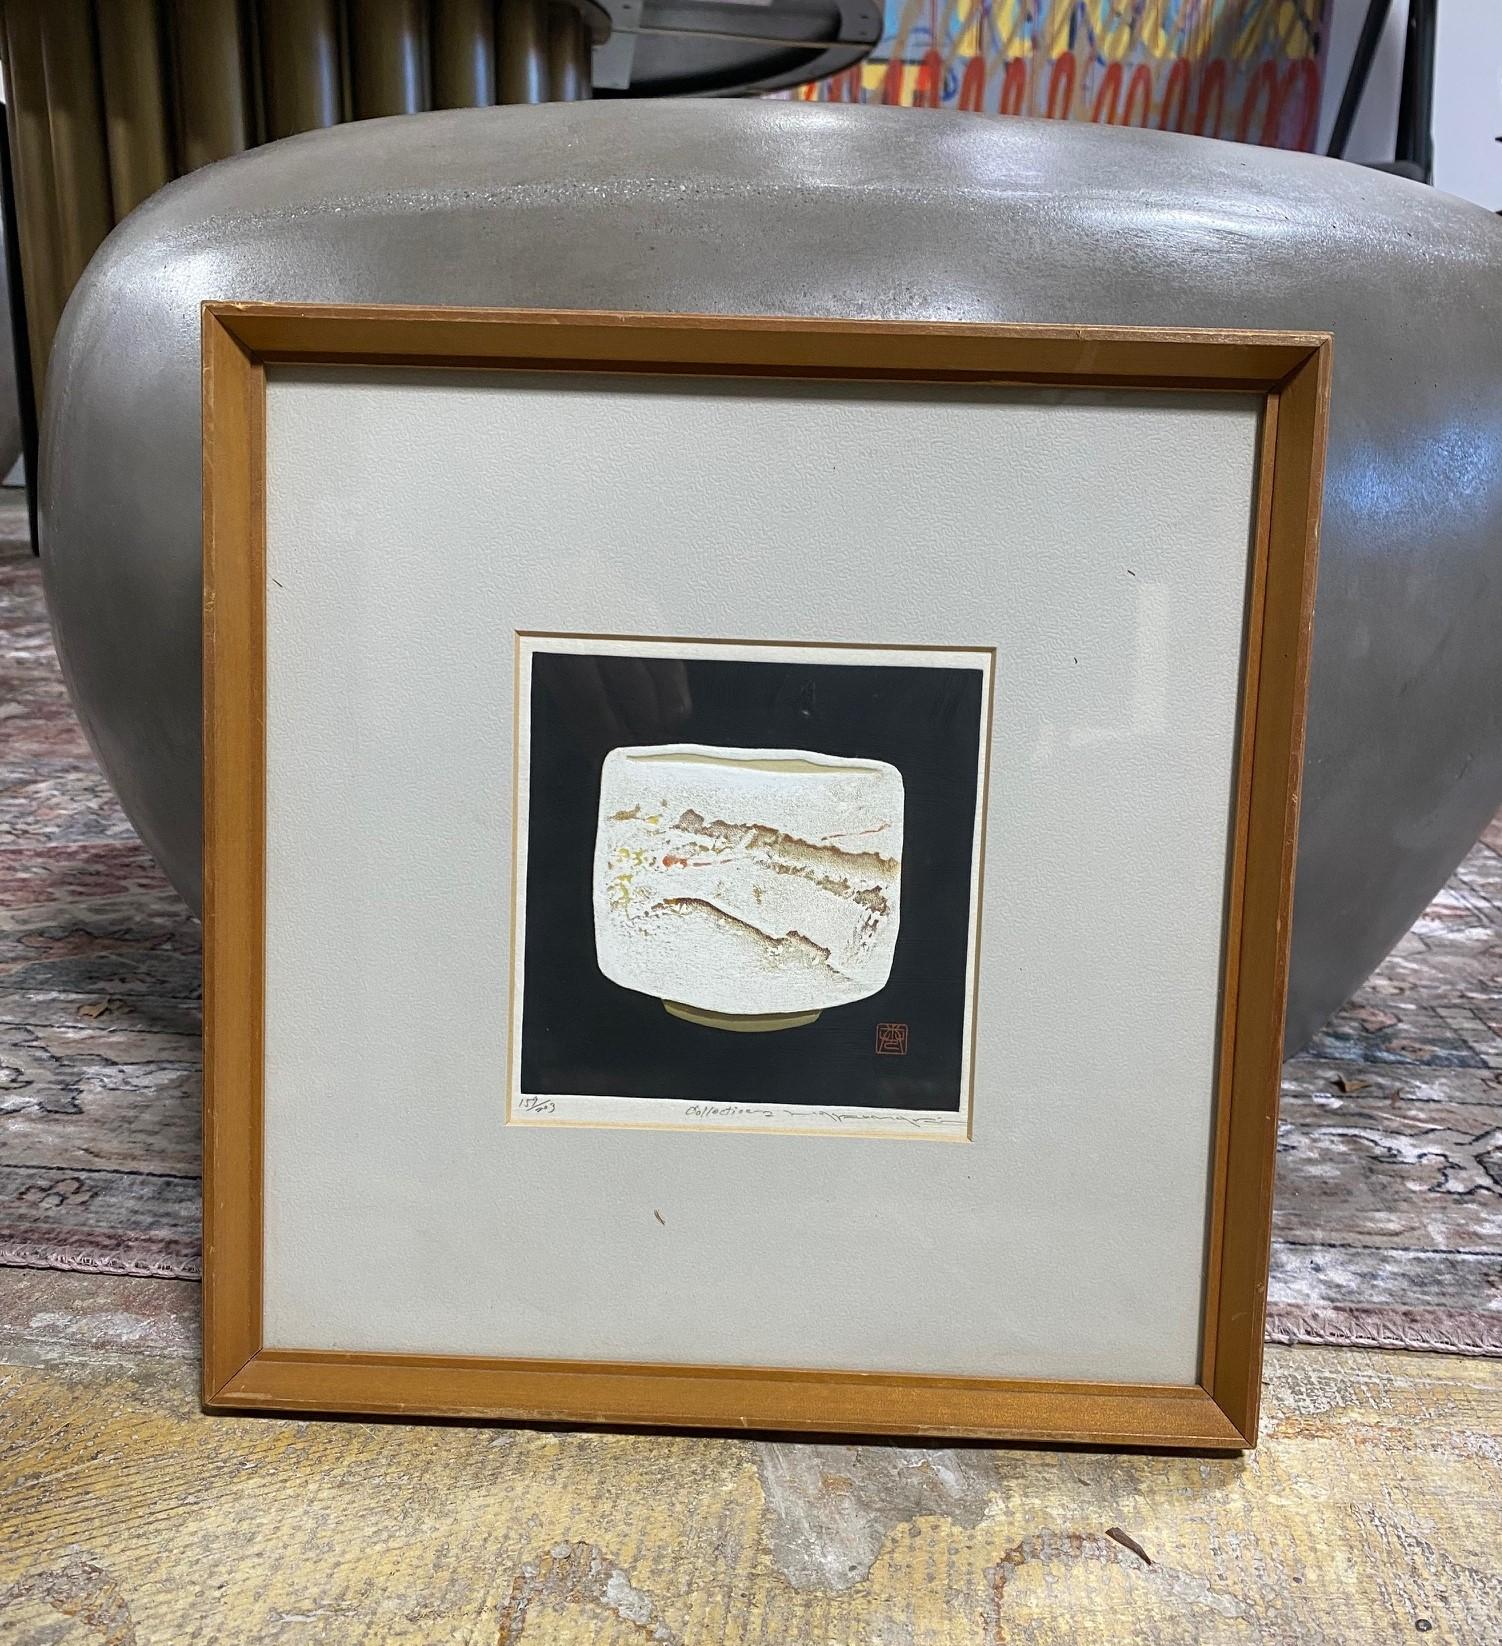 A wonderfully textured and embossed woodblock print of an ancient yunomi teacup by famed Japanese artist Haku Maki.

The print is sealed with an artist's stamp, hand pencil signed, numbered (159/203), and titled (Collection 2) by the